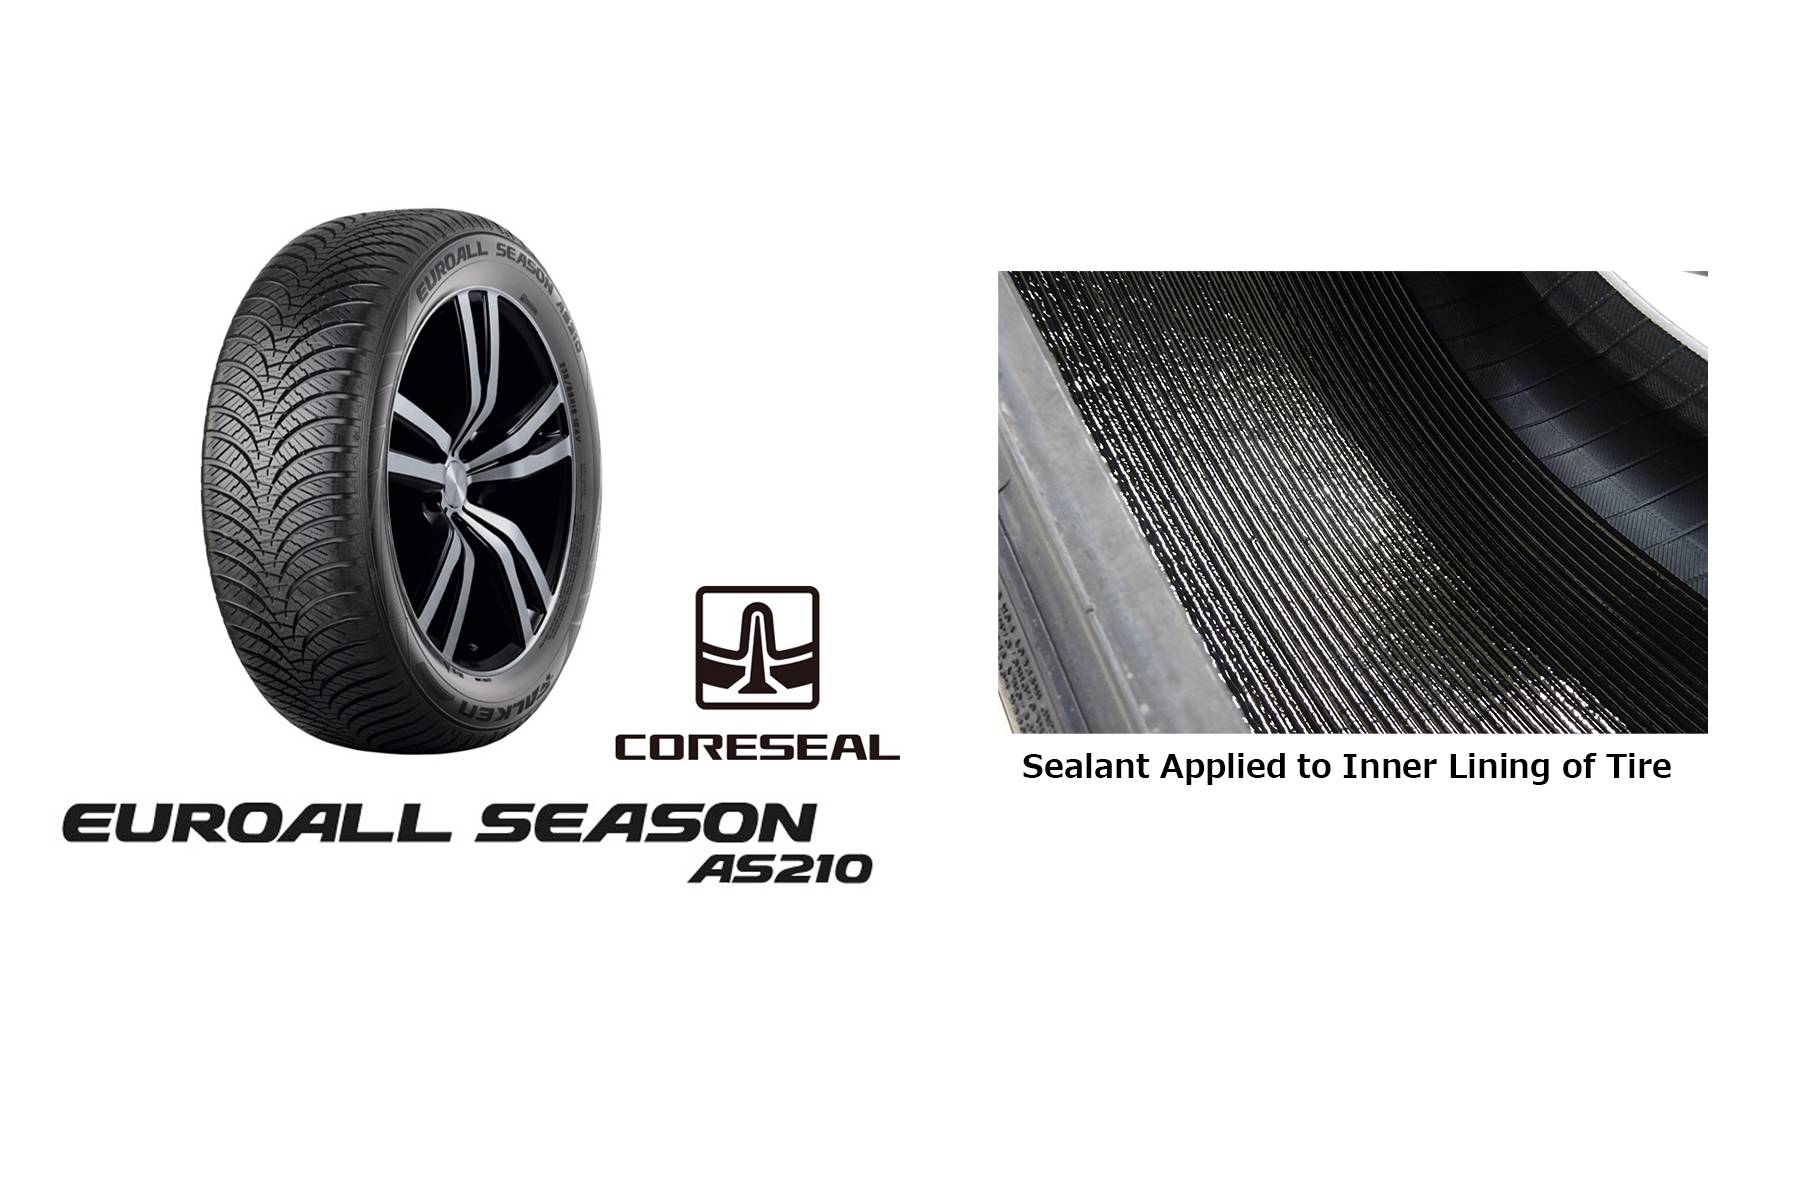 FALKEN EUROALL AS210 | Released as in Website Feature Leaks FALKEN Technology SEASON First for Prevention the Global of Air Germany to Tire CORESEAL